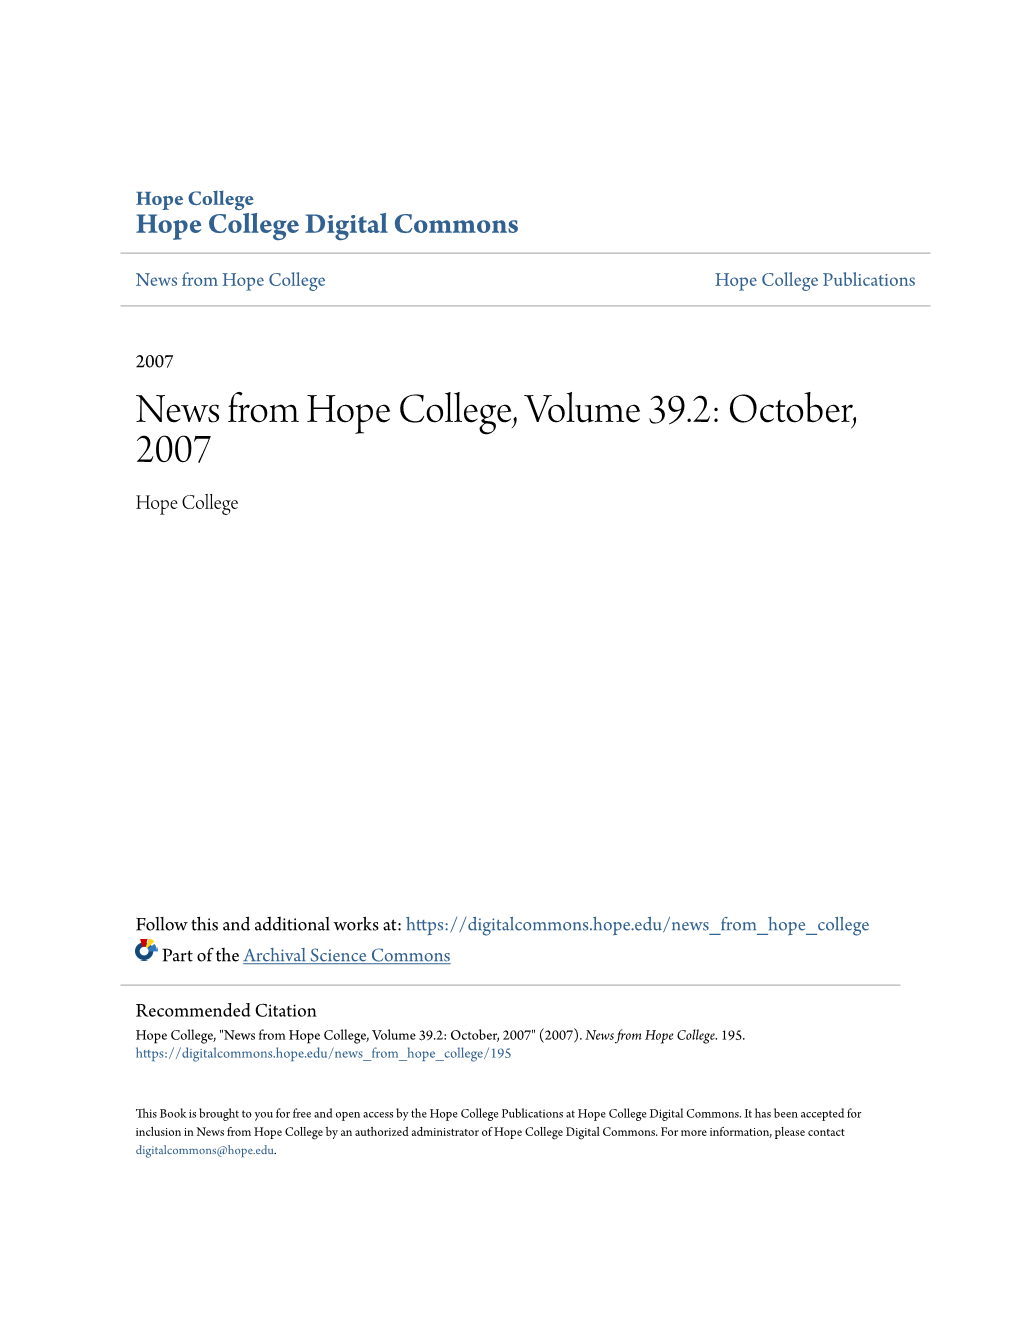 News from Hope College, Volume 39.2: October, 2007 Hope College